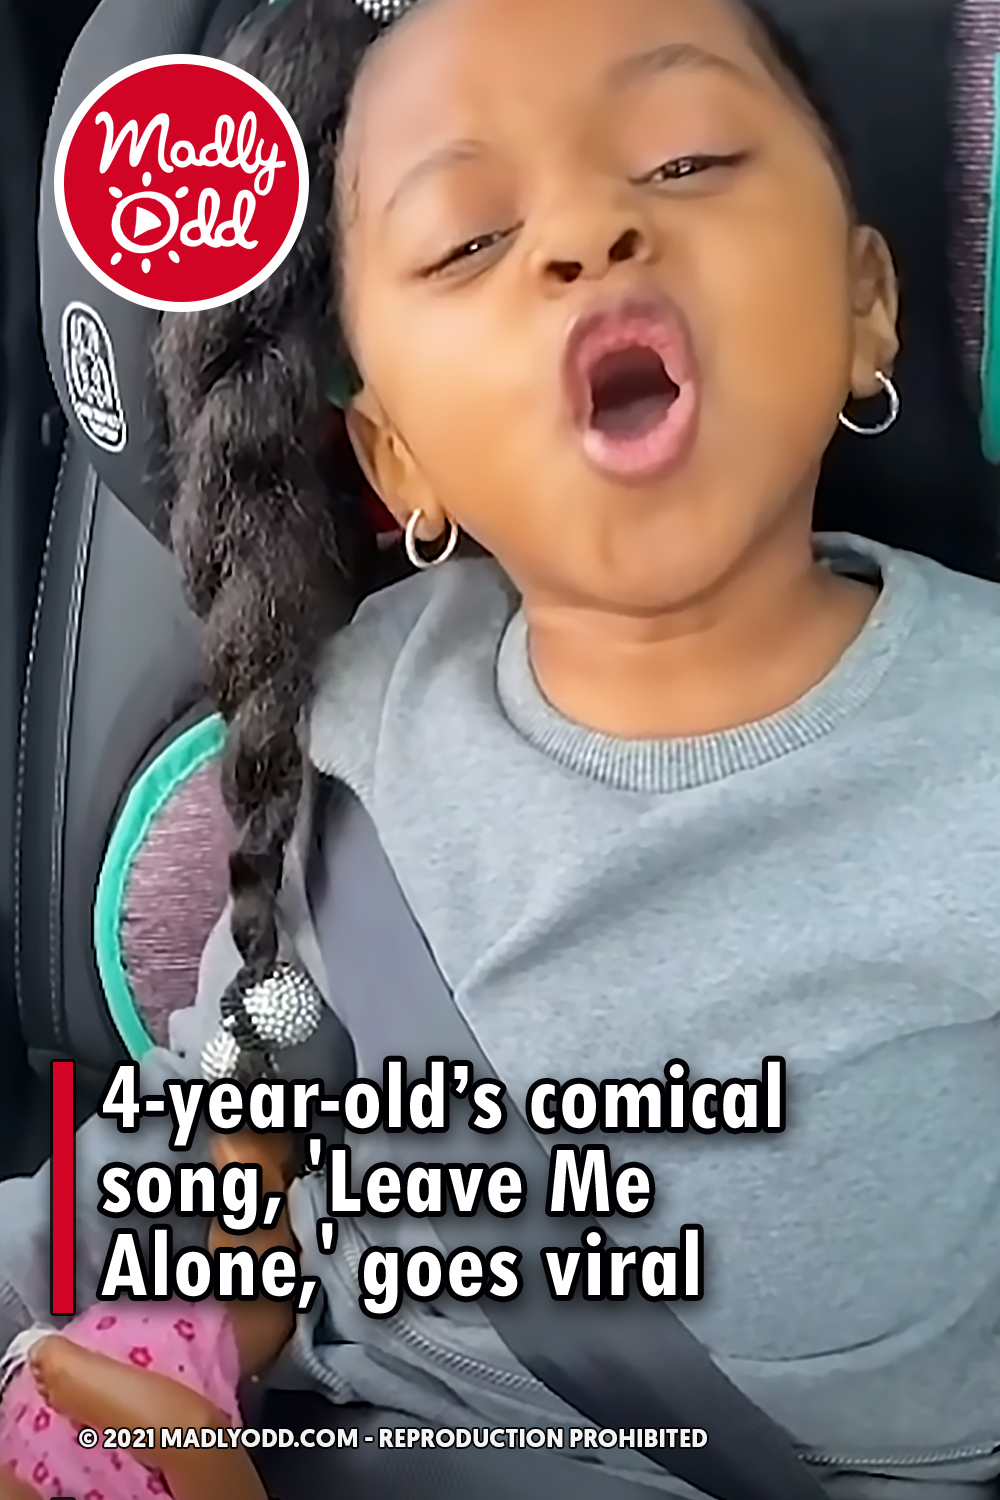 4-year-old’s comical song, \'Leave Me Alone,\' goes viral